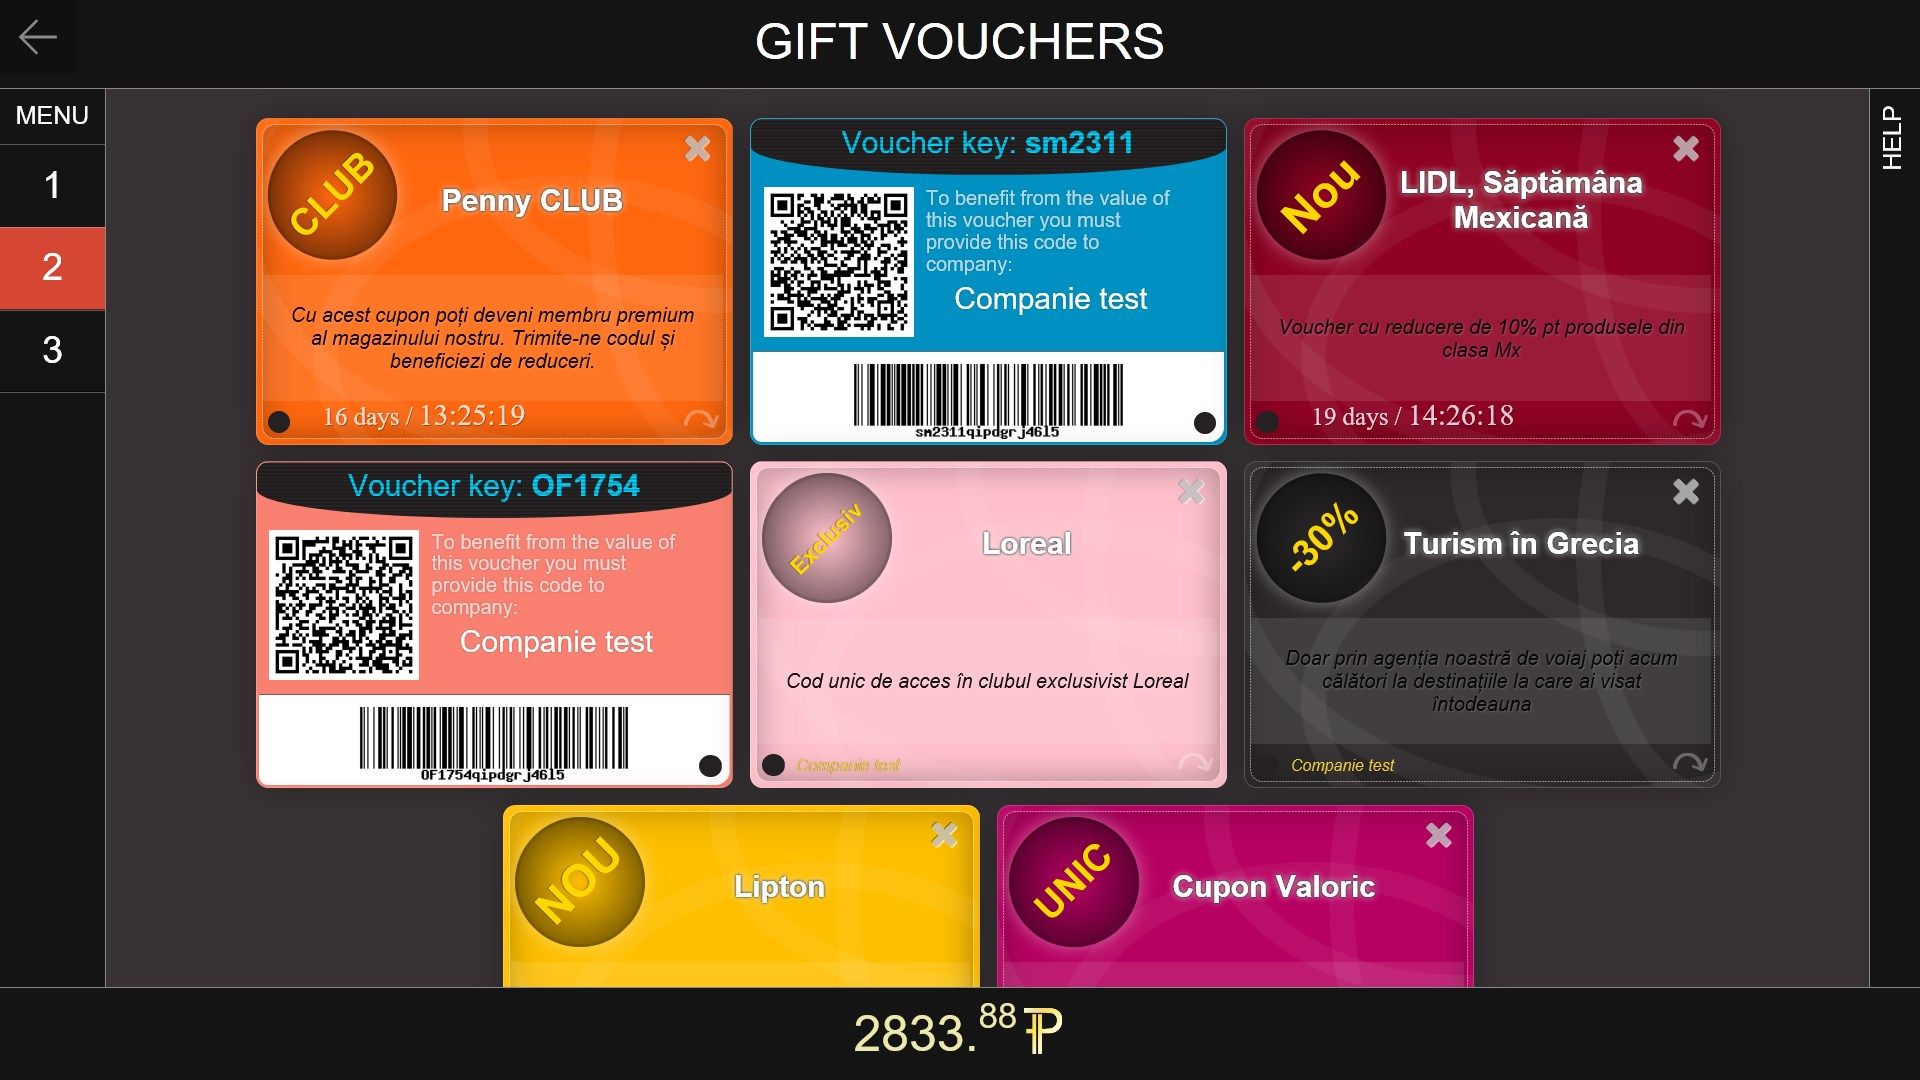 Gift vouchers from favorite stores, on reverse is the code recognition.